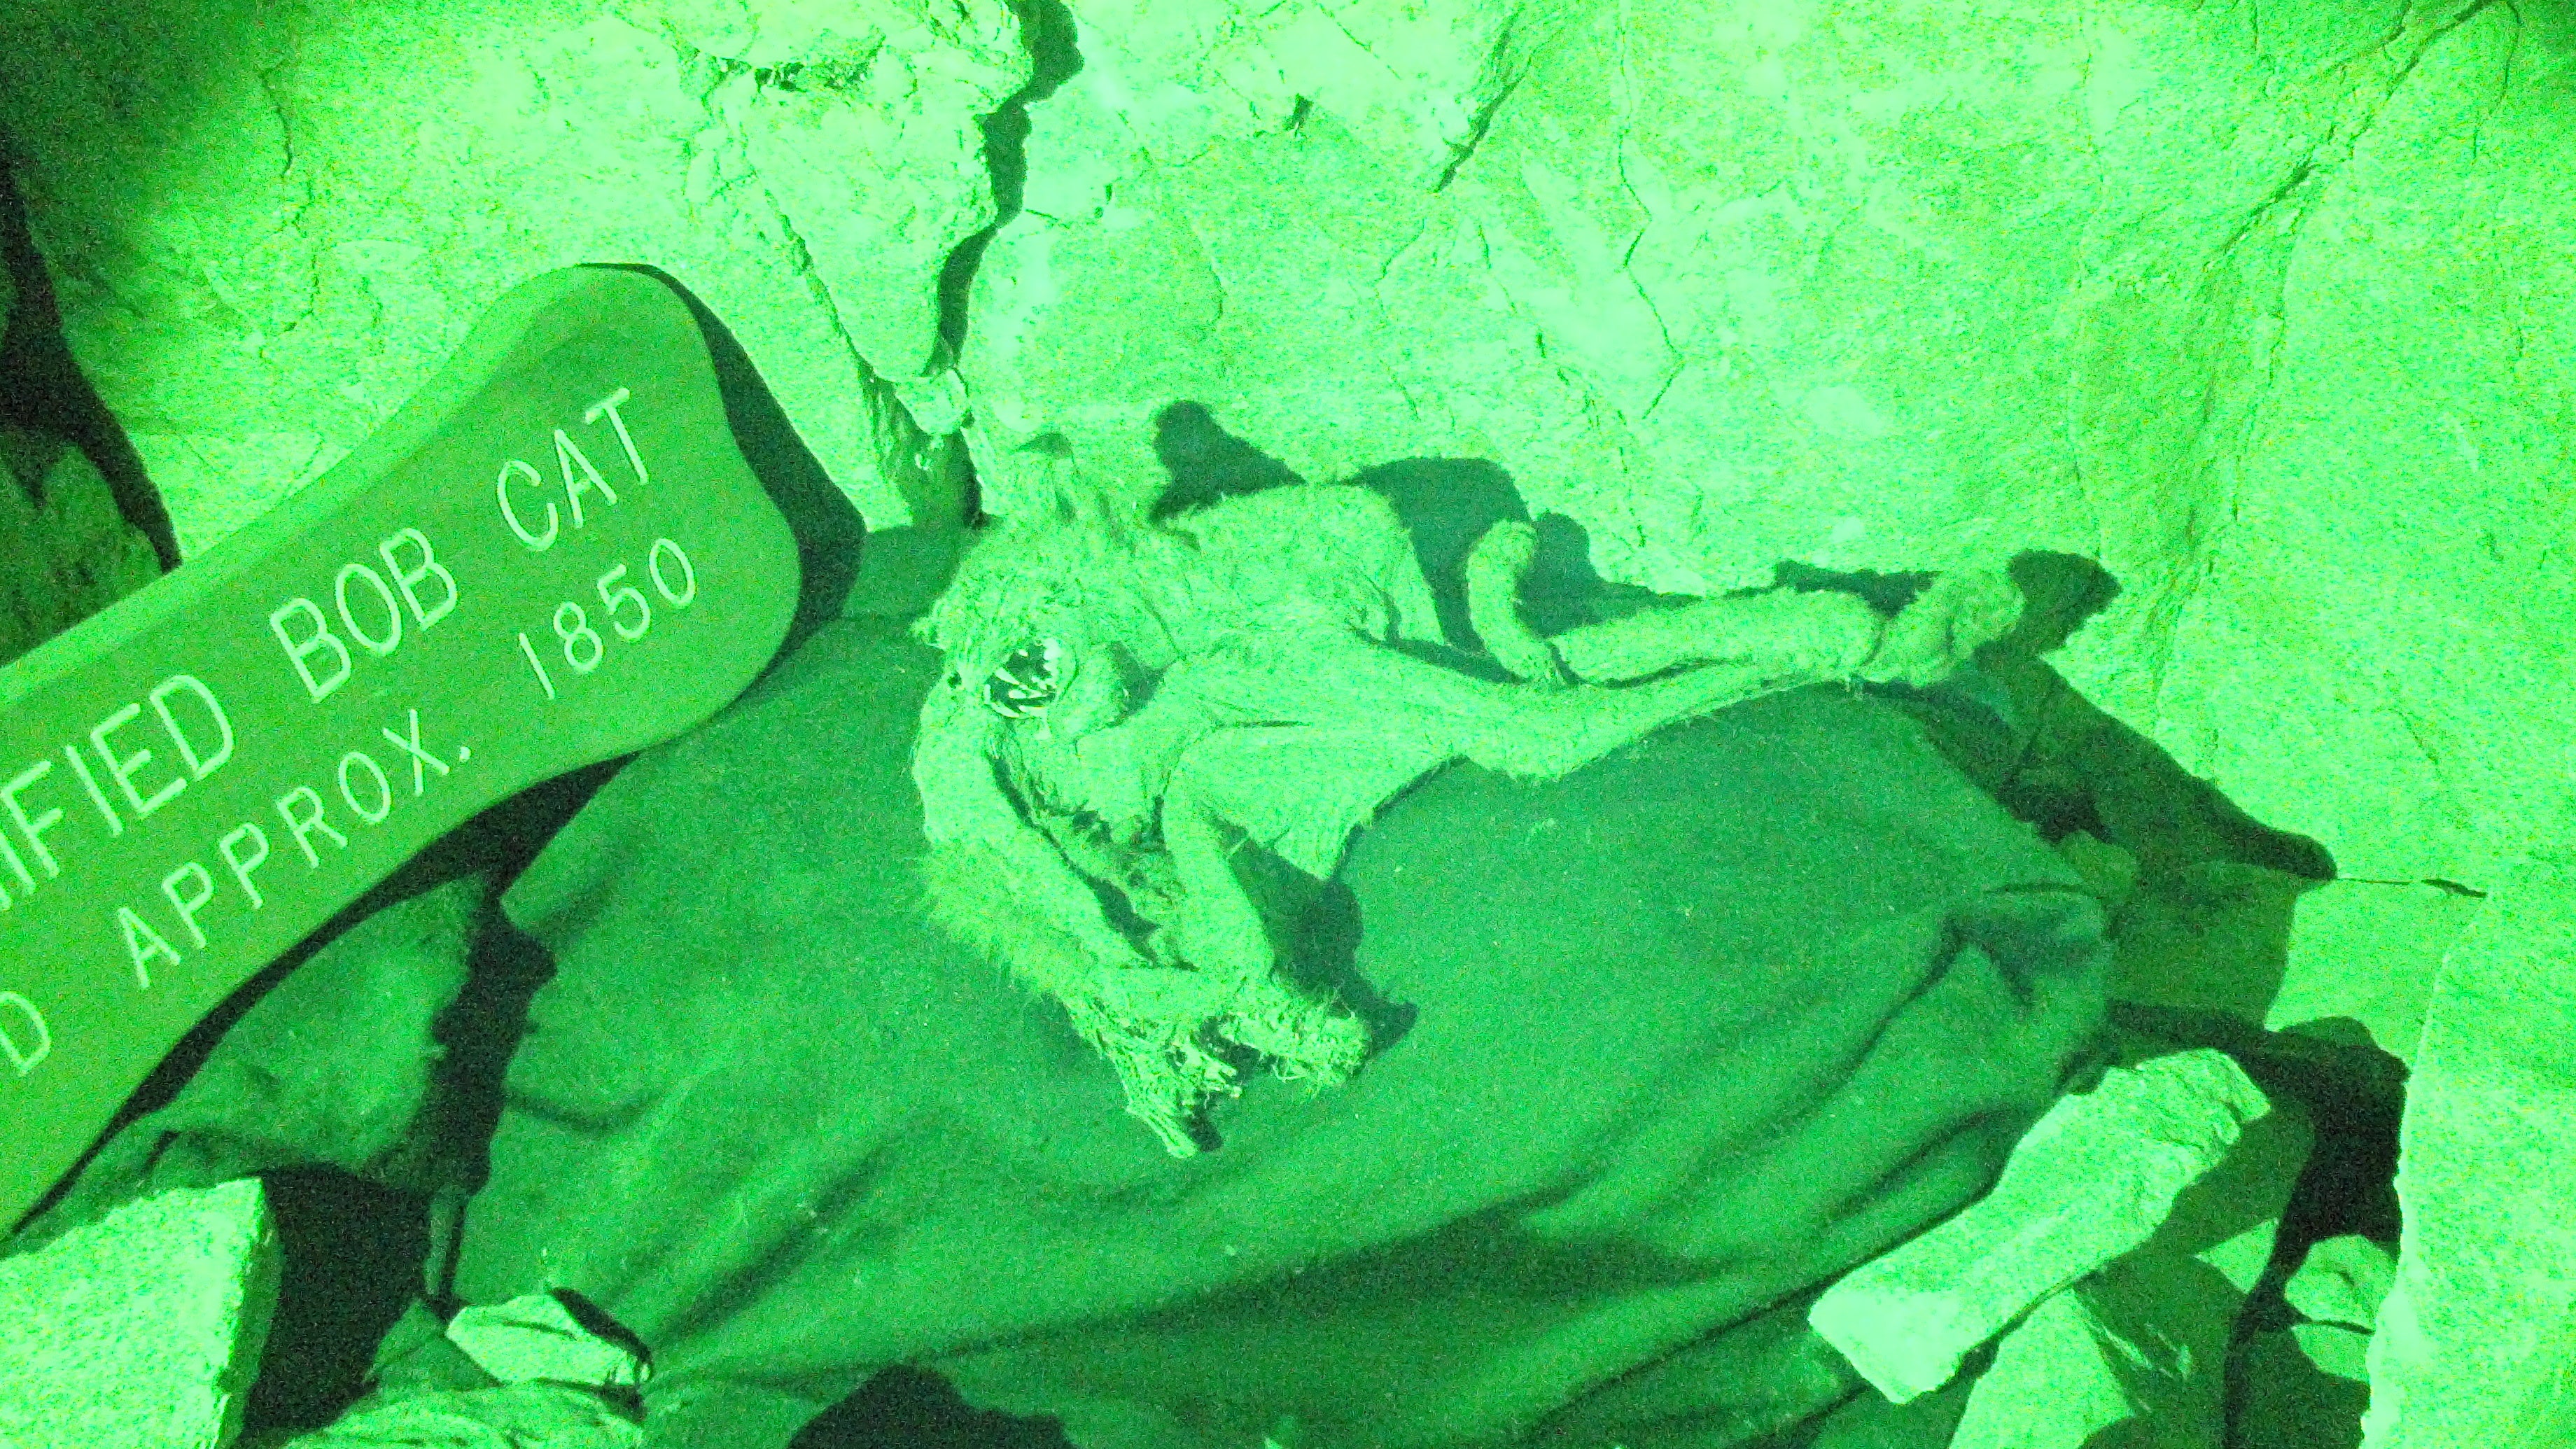 This was taken during our ghost walk which is done in complete pitch black using my night vision camera, this is a mummified BOB cat